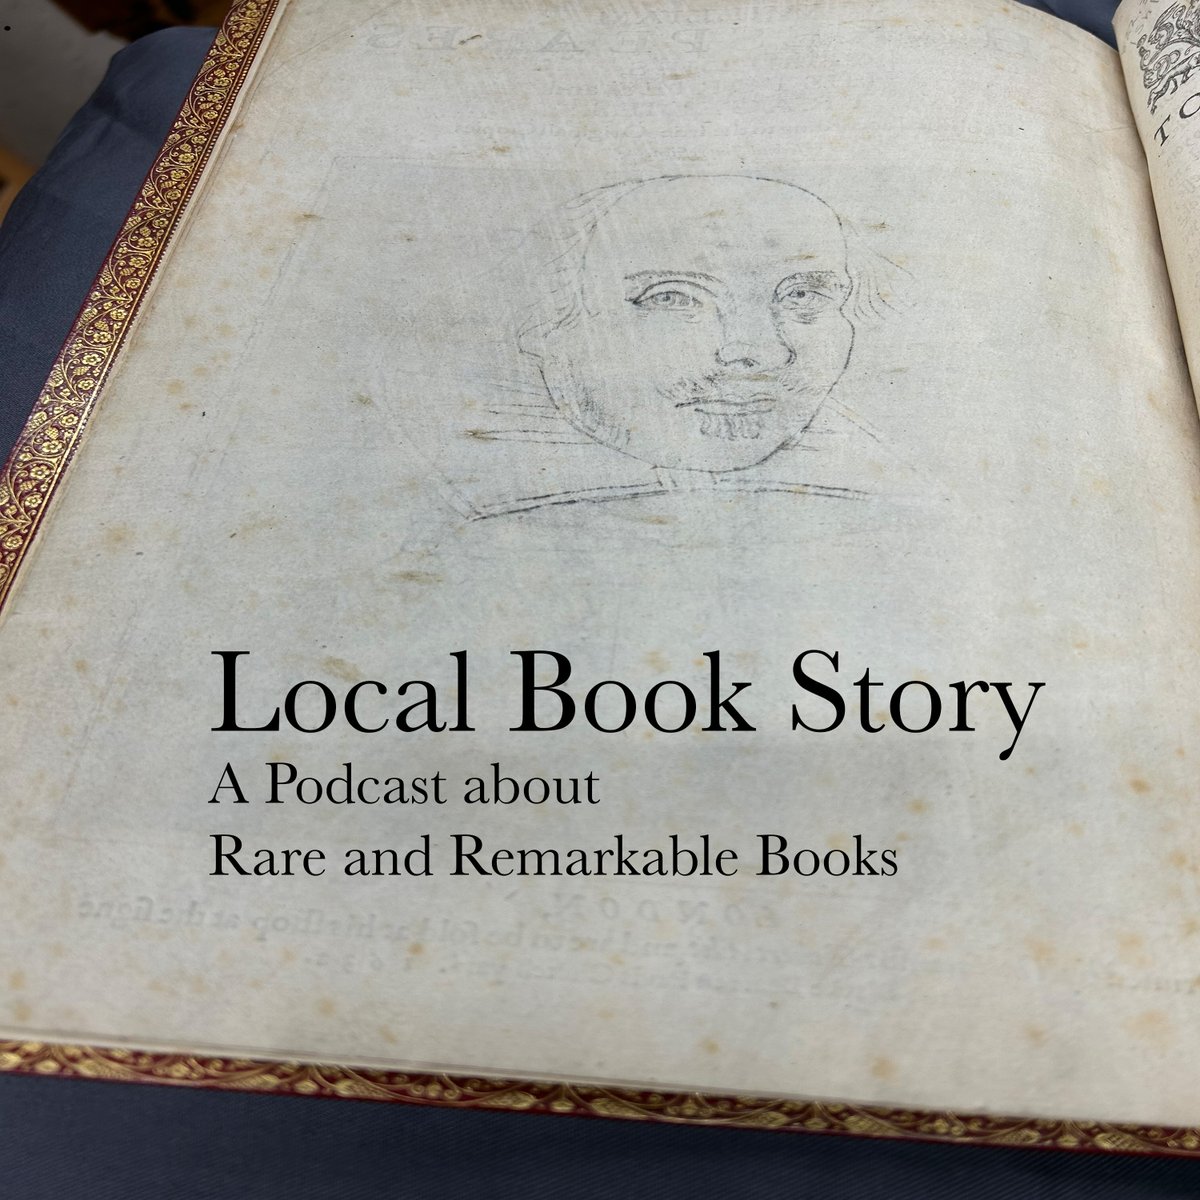 The first episode of Local Book Story is here! Learn about the Burton Barr Public Library in Phoenix, AZ and listen to an interview with Alex Mada, librarian and special collections manager (12 min). brandikadams.com/localbookstory #rarebooks #librarians #printing